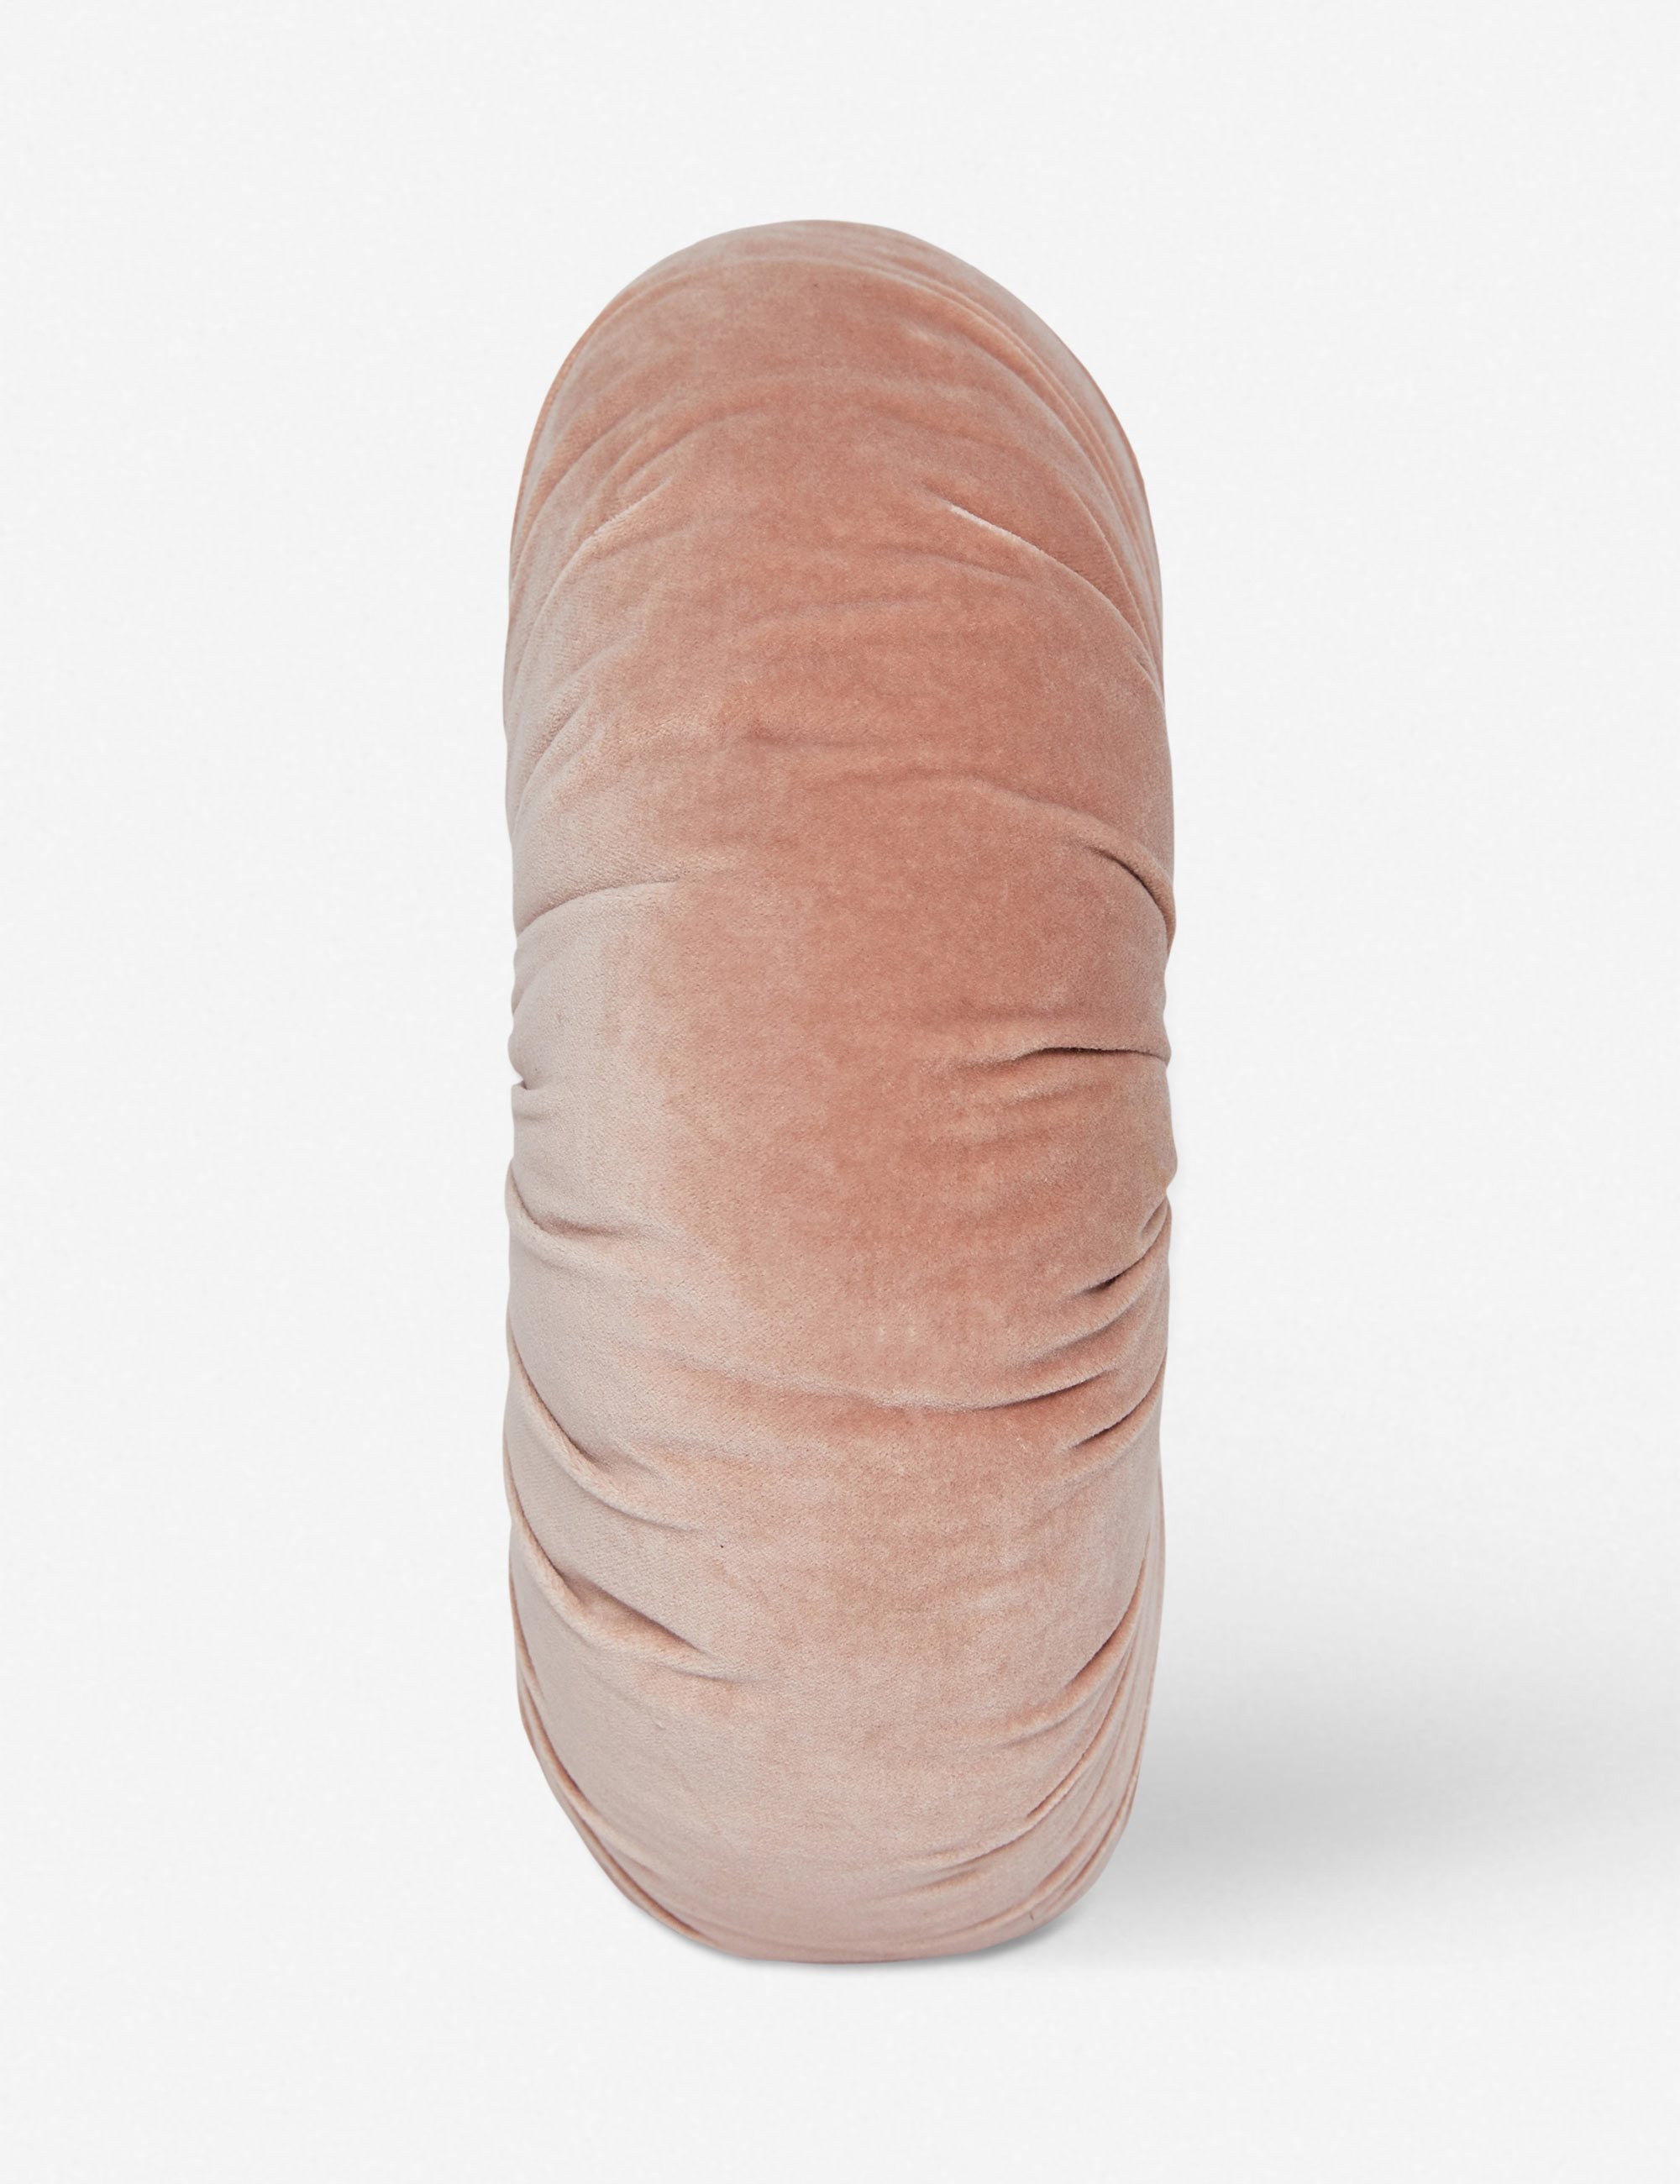 Side view of the Monroe rosewater pink velvet round pillow